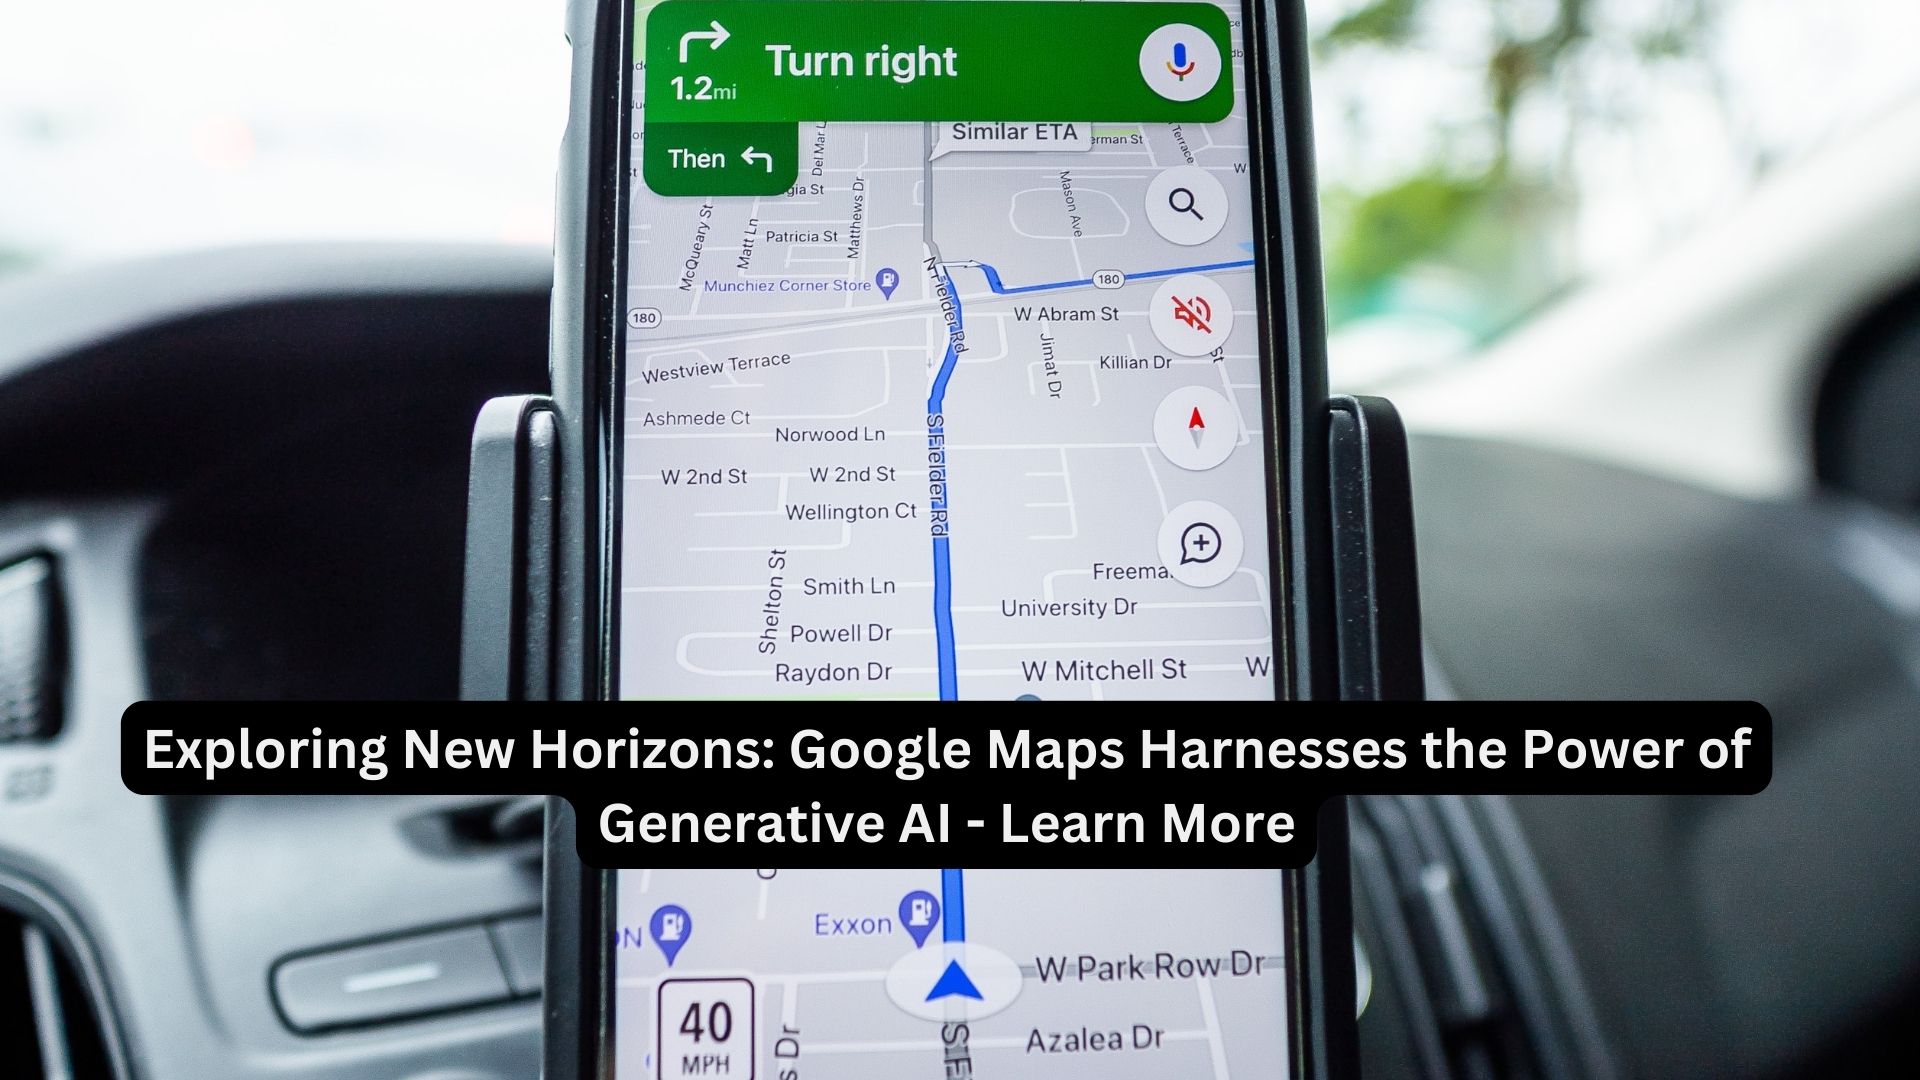 Exploring New Horizons: Google Maps Harnesses the Power of Generative AI - Learn More